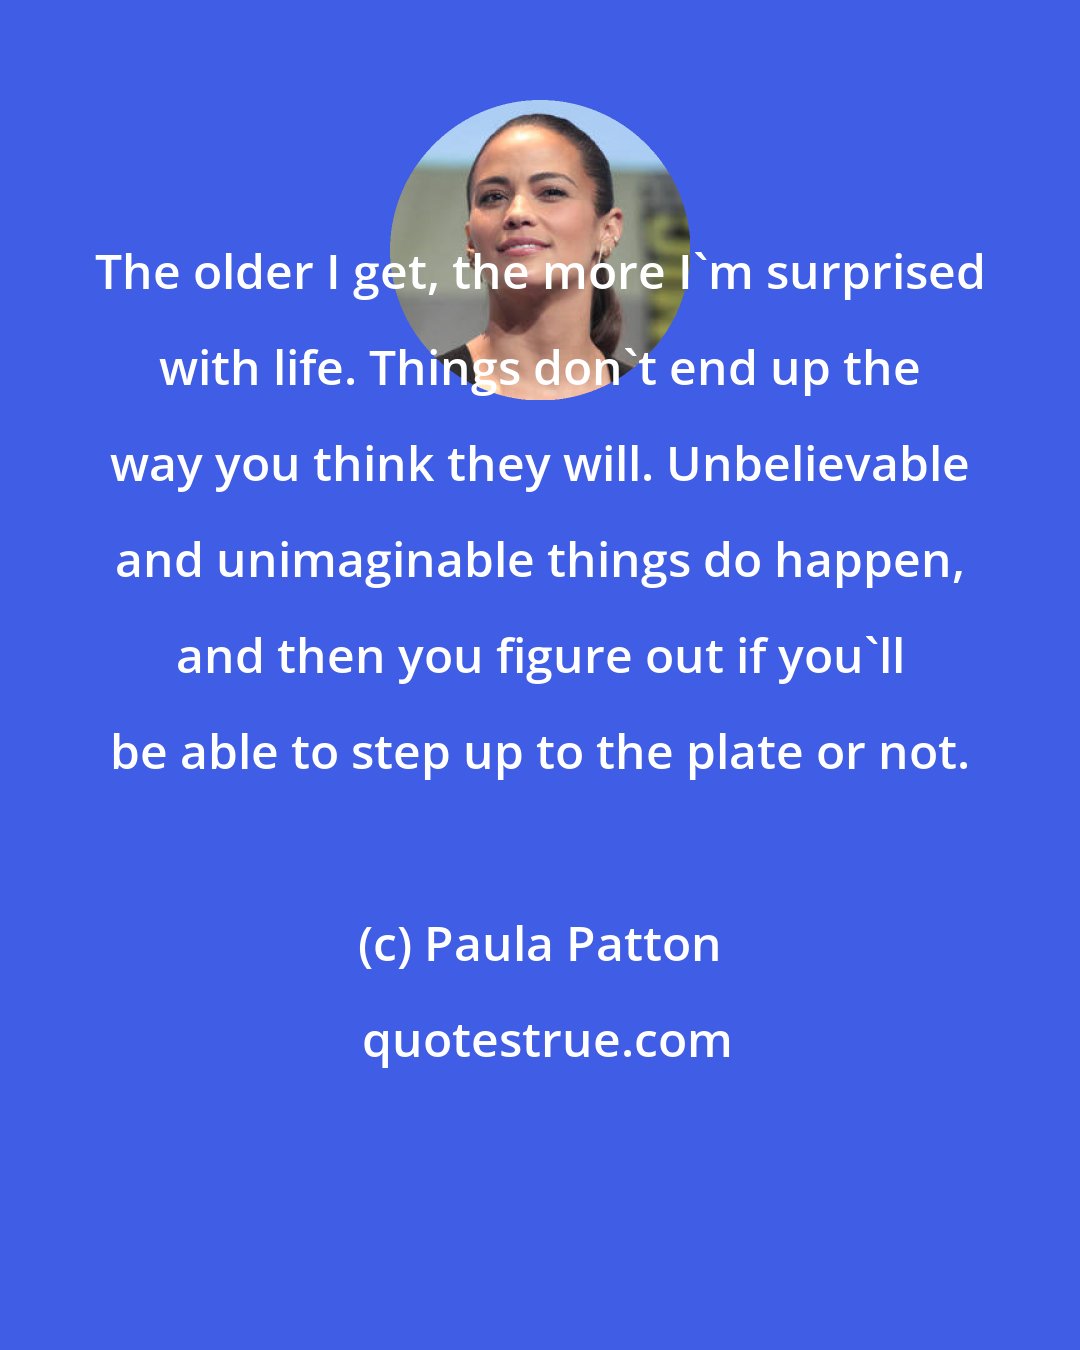 Paula Patton: The older I get, the more I'm surprised with life. Things don't end up the way you think they will. Unbelievable and unimaginable things do happen, and then you figure out if you'll be able to step up to the plate or not.